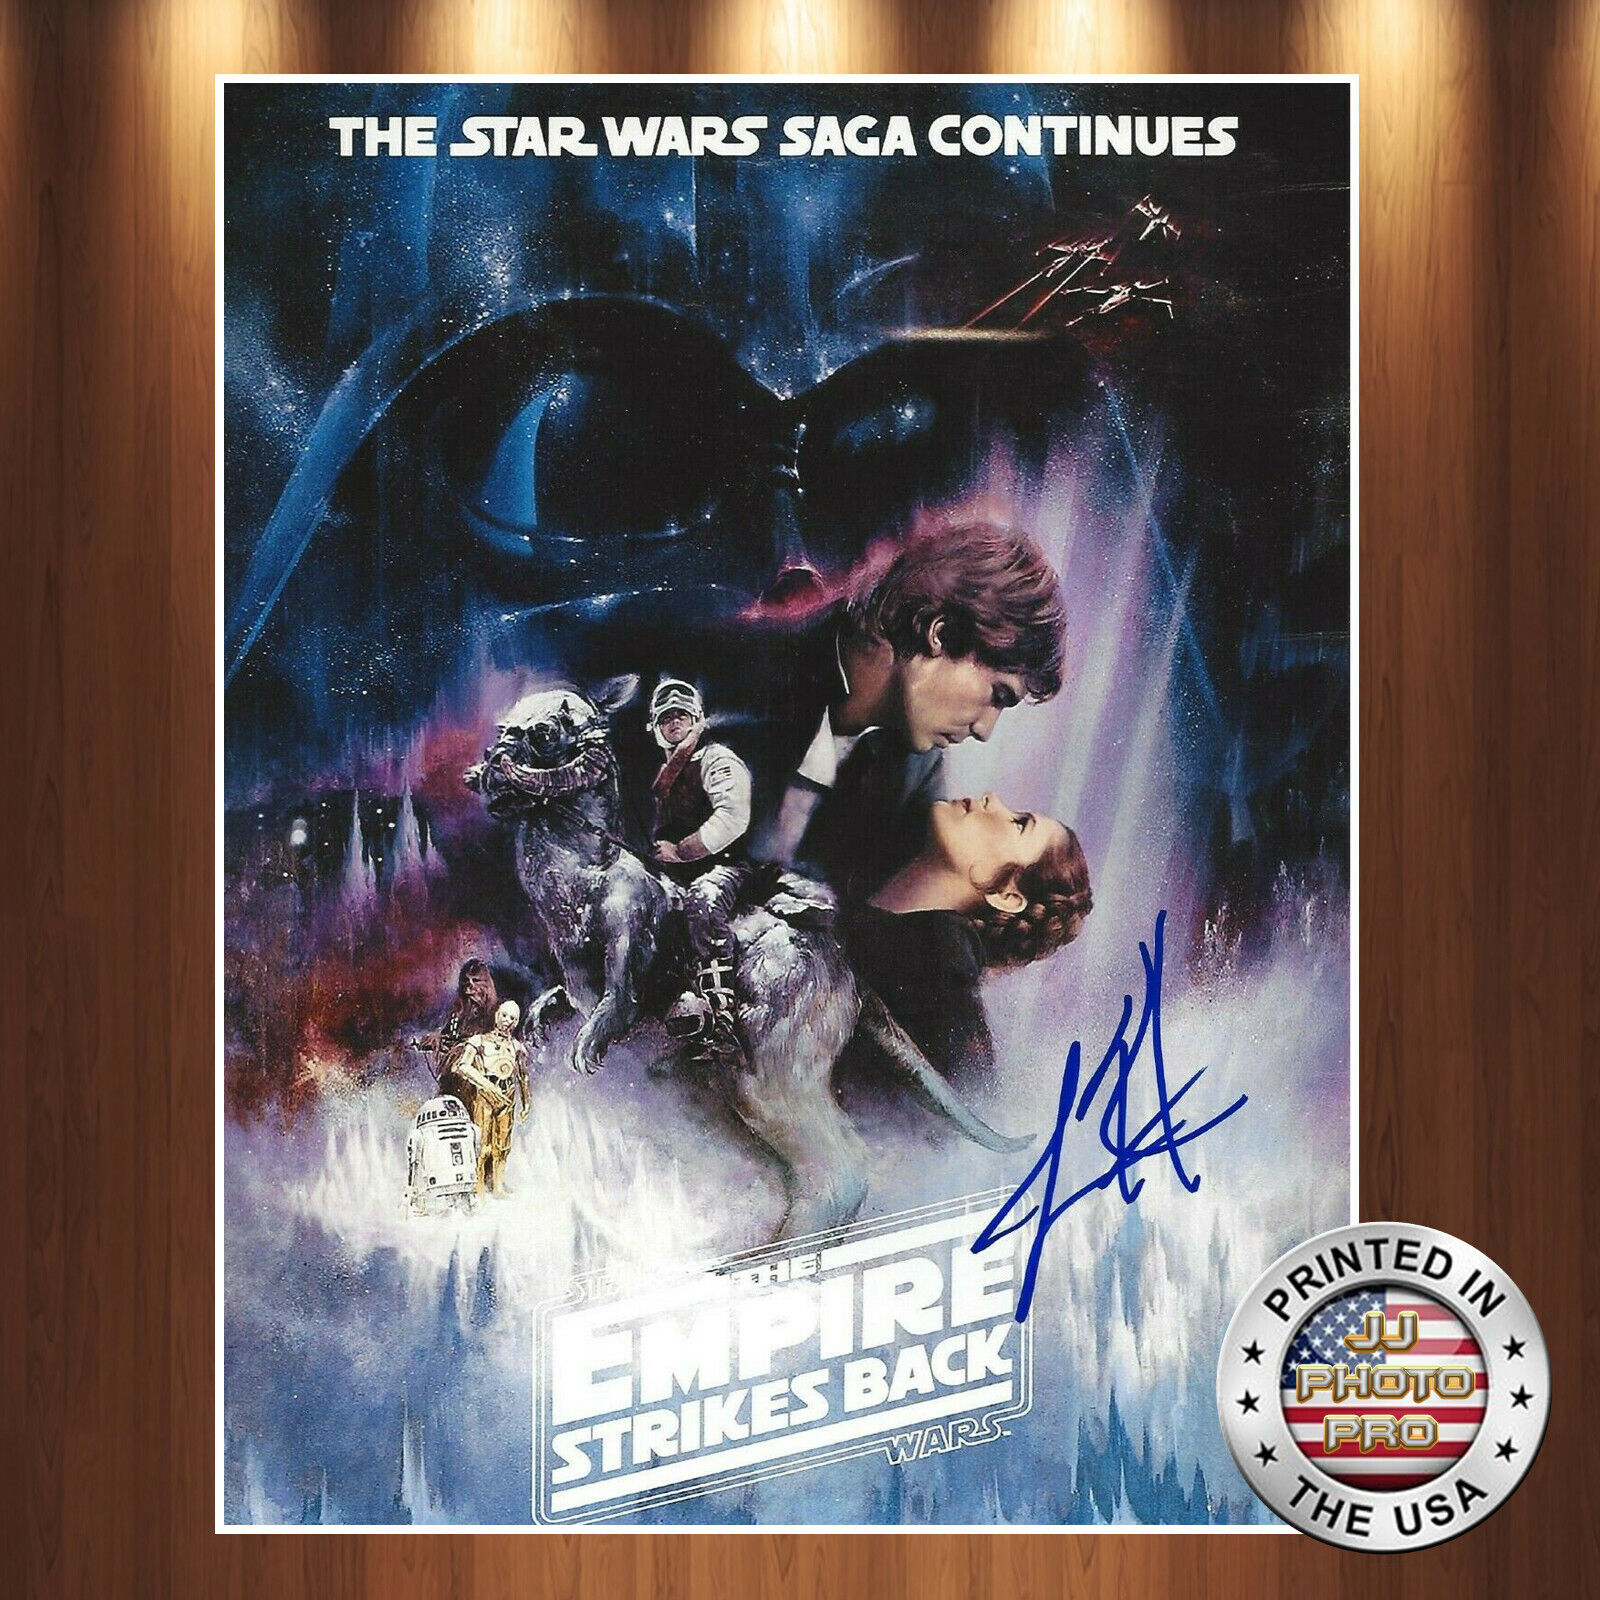 Lawrence Kasden Autographed Signed 8x10 Photo Poster painting (Star Wars) REPRINT